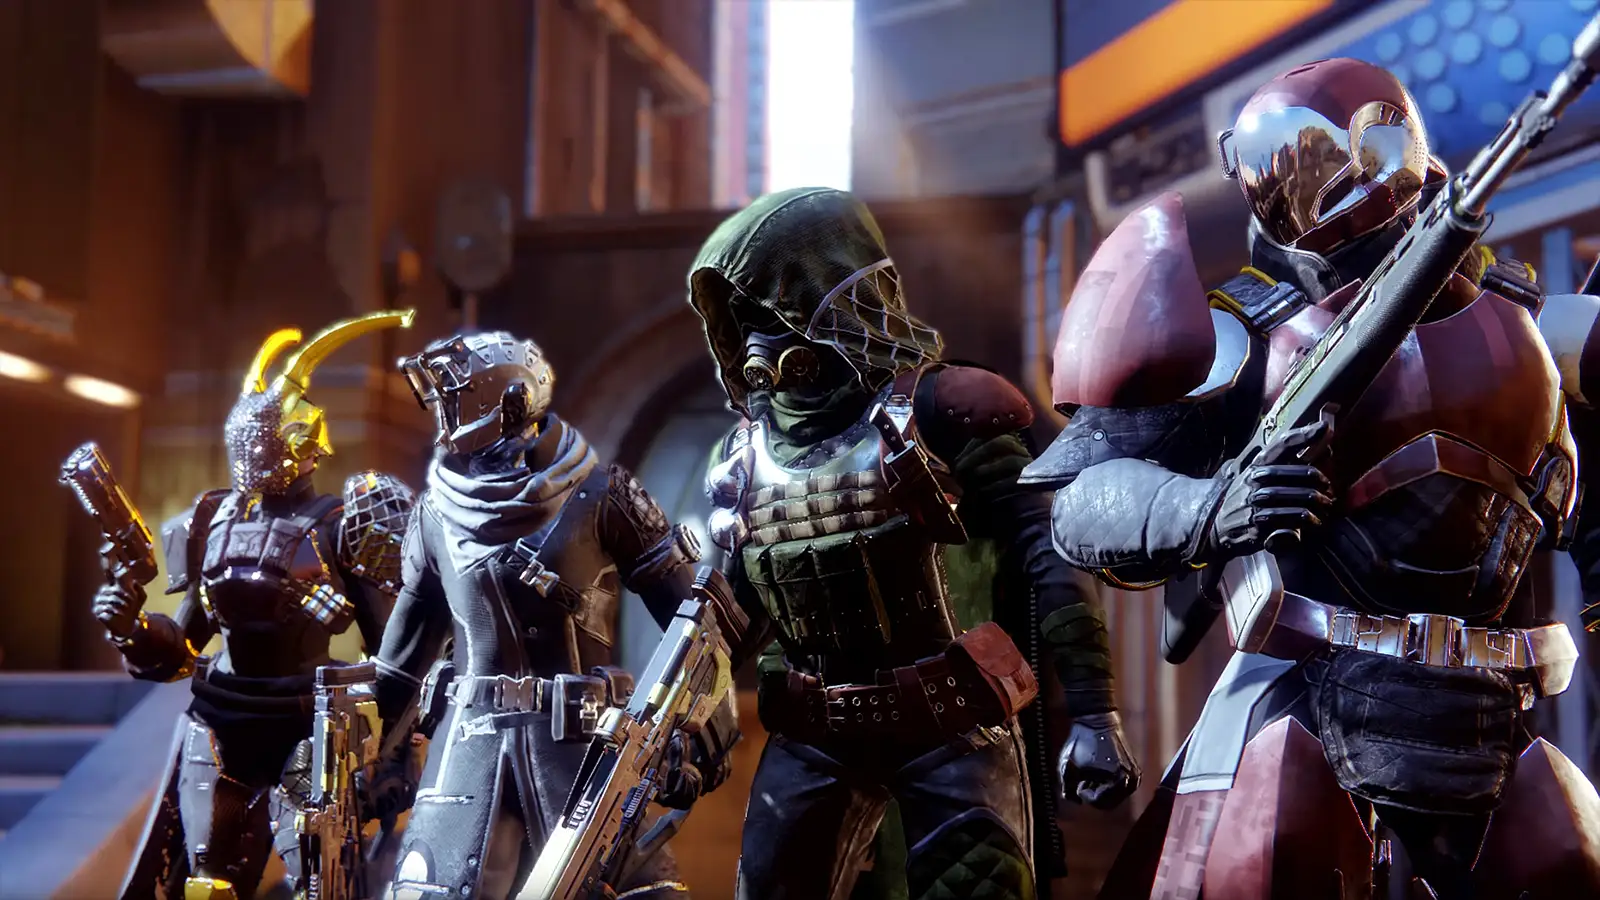 Bungie Hints At Big Team Battle-Like Mode In Destiny 2: "It Is Something We Are Actively Investigating"